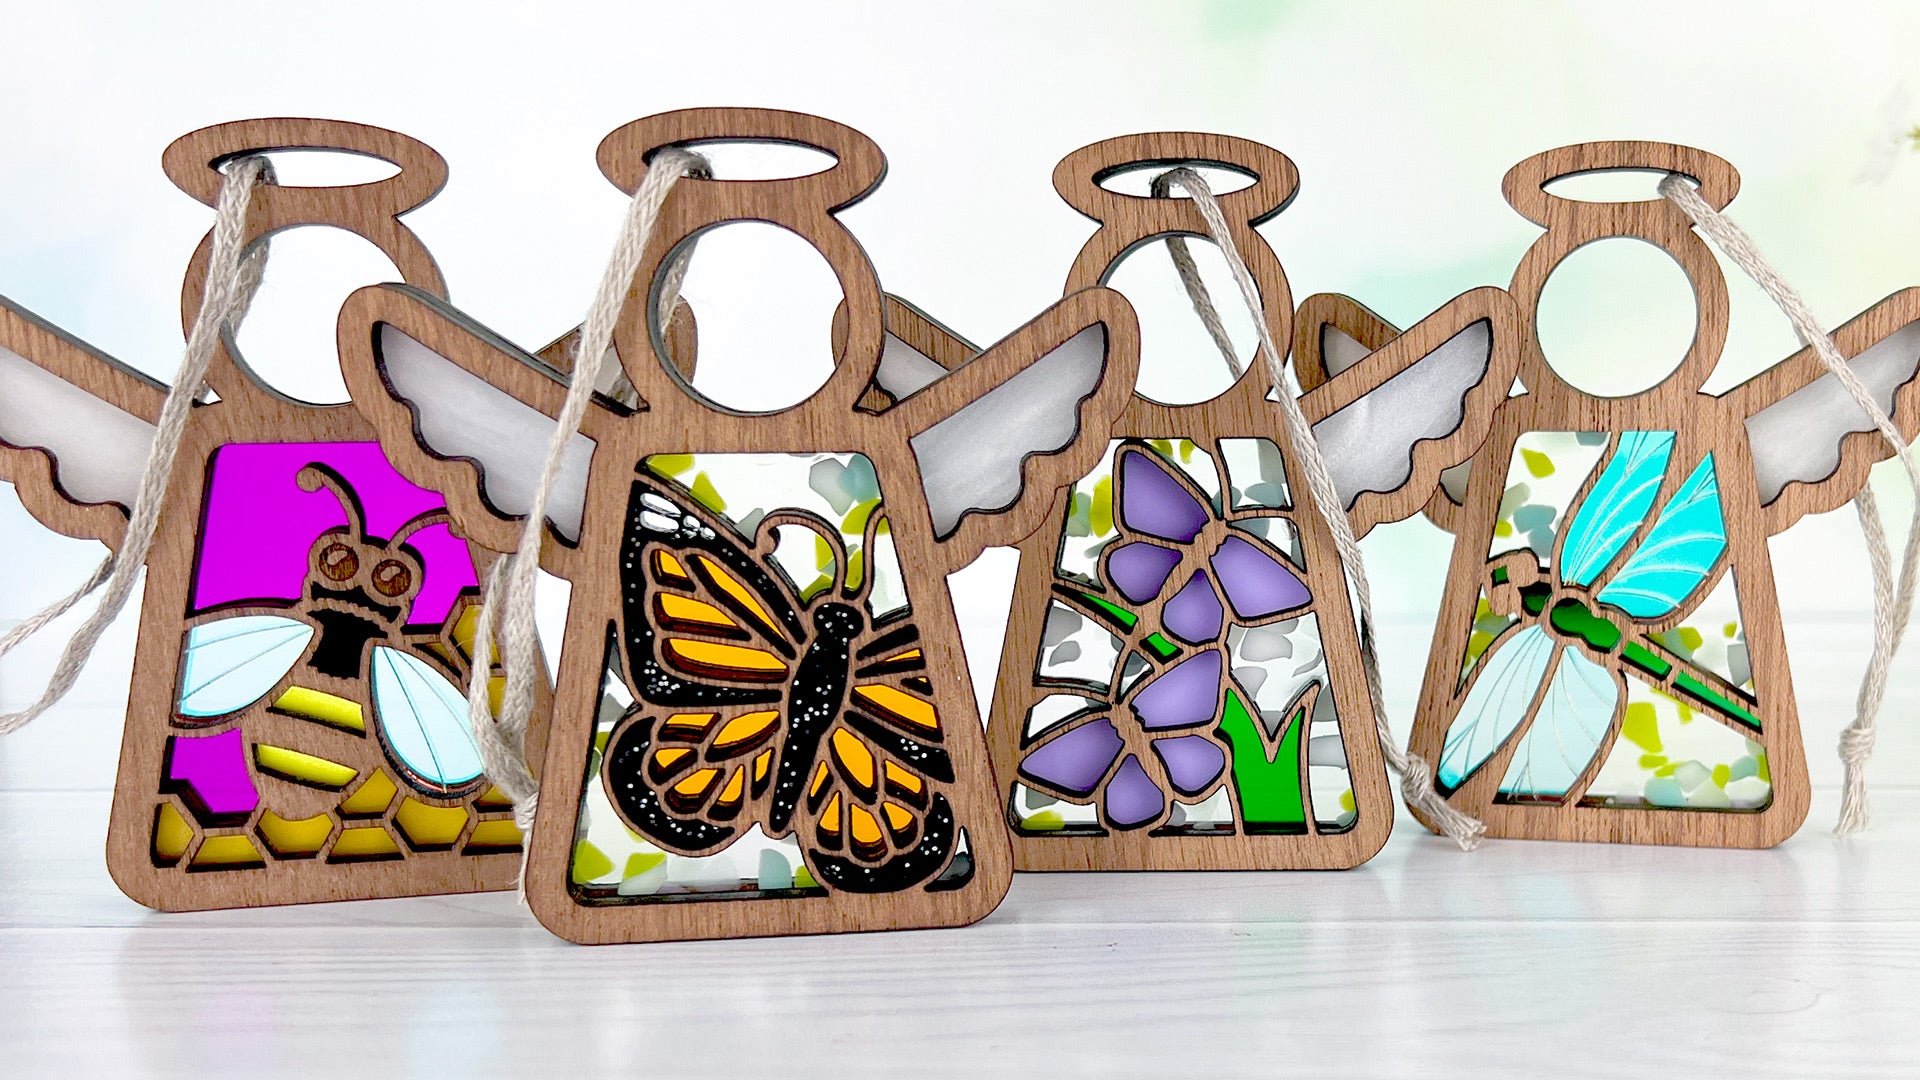 Mother’s Angels® Honey Bee ornament, Monarch Butterfly ornamenty, Playful Purple Butterflies ornament and Dragonfly ornament lined up in a row.